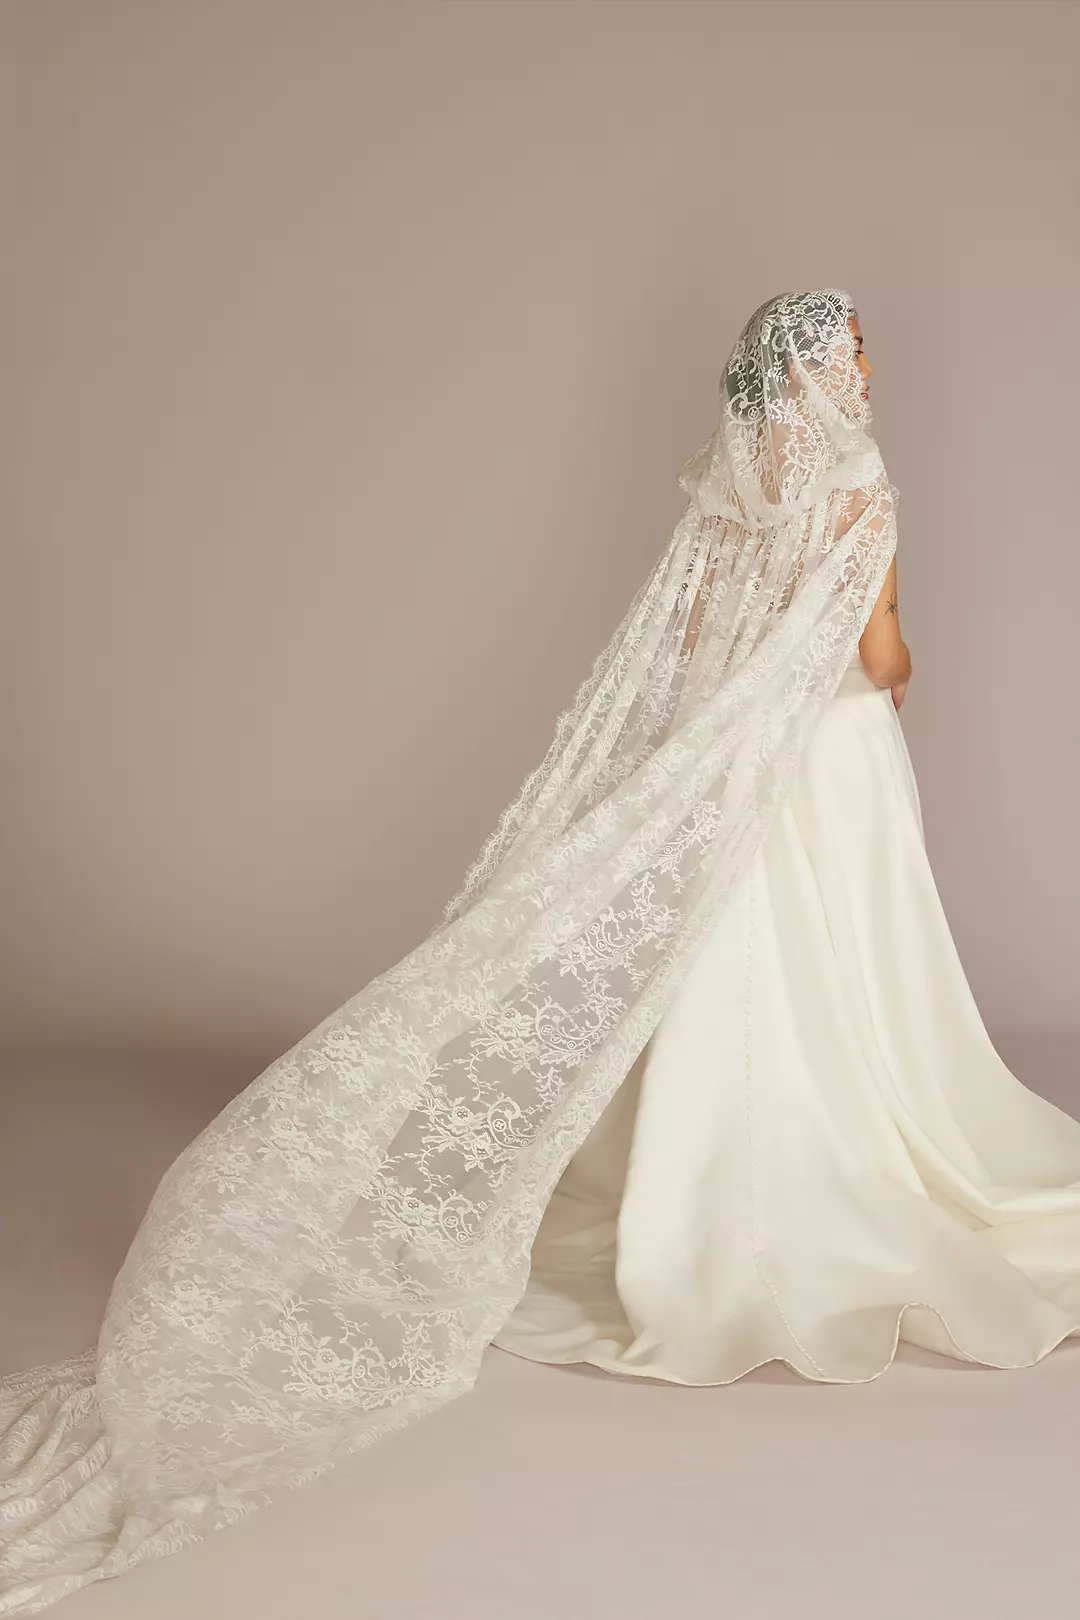 Lace Hooded Bridal Cape